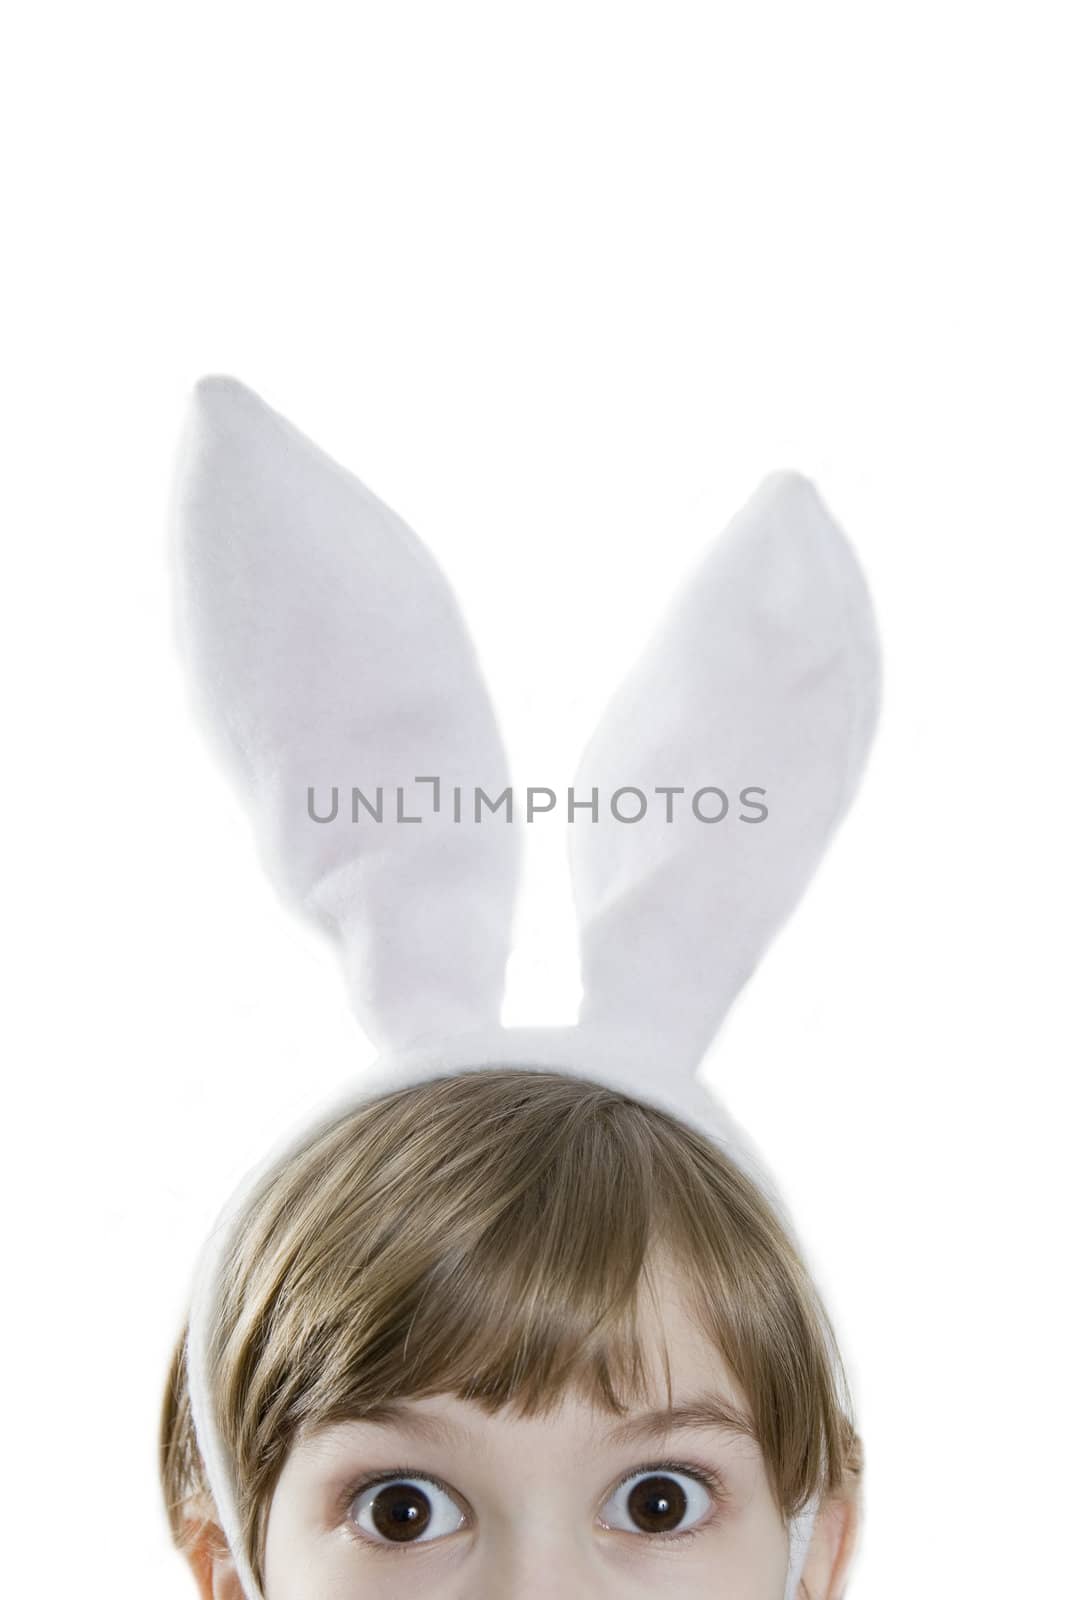 Eyes  beautiful girl in rabbit ears.  Lots of copyspace and room for text on this isolate. Looking in wide-eyed